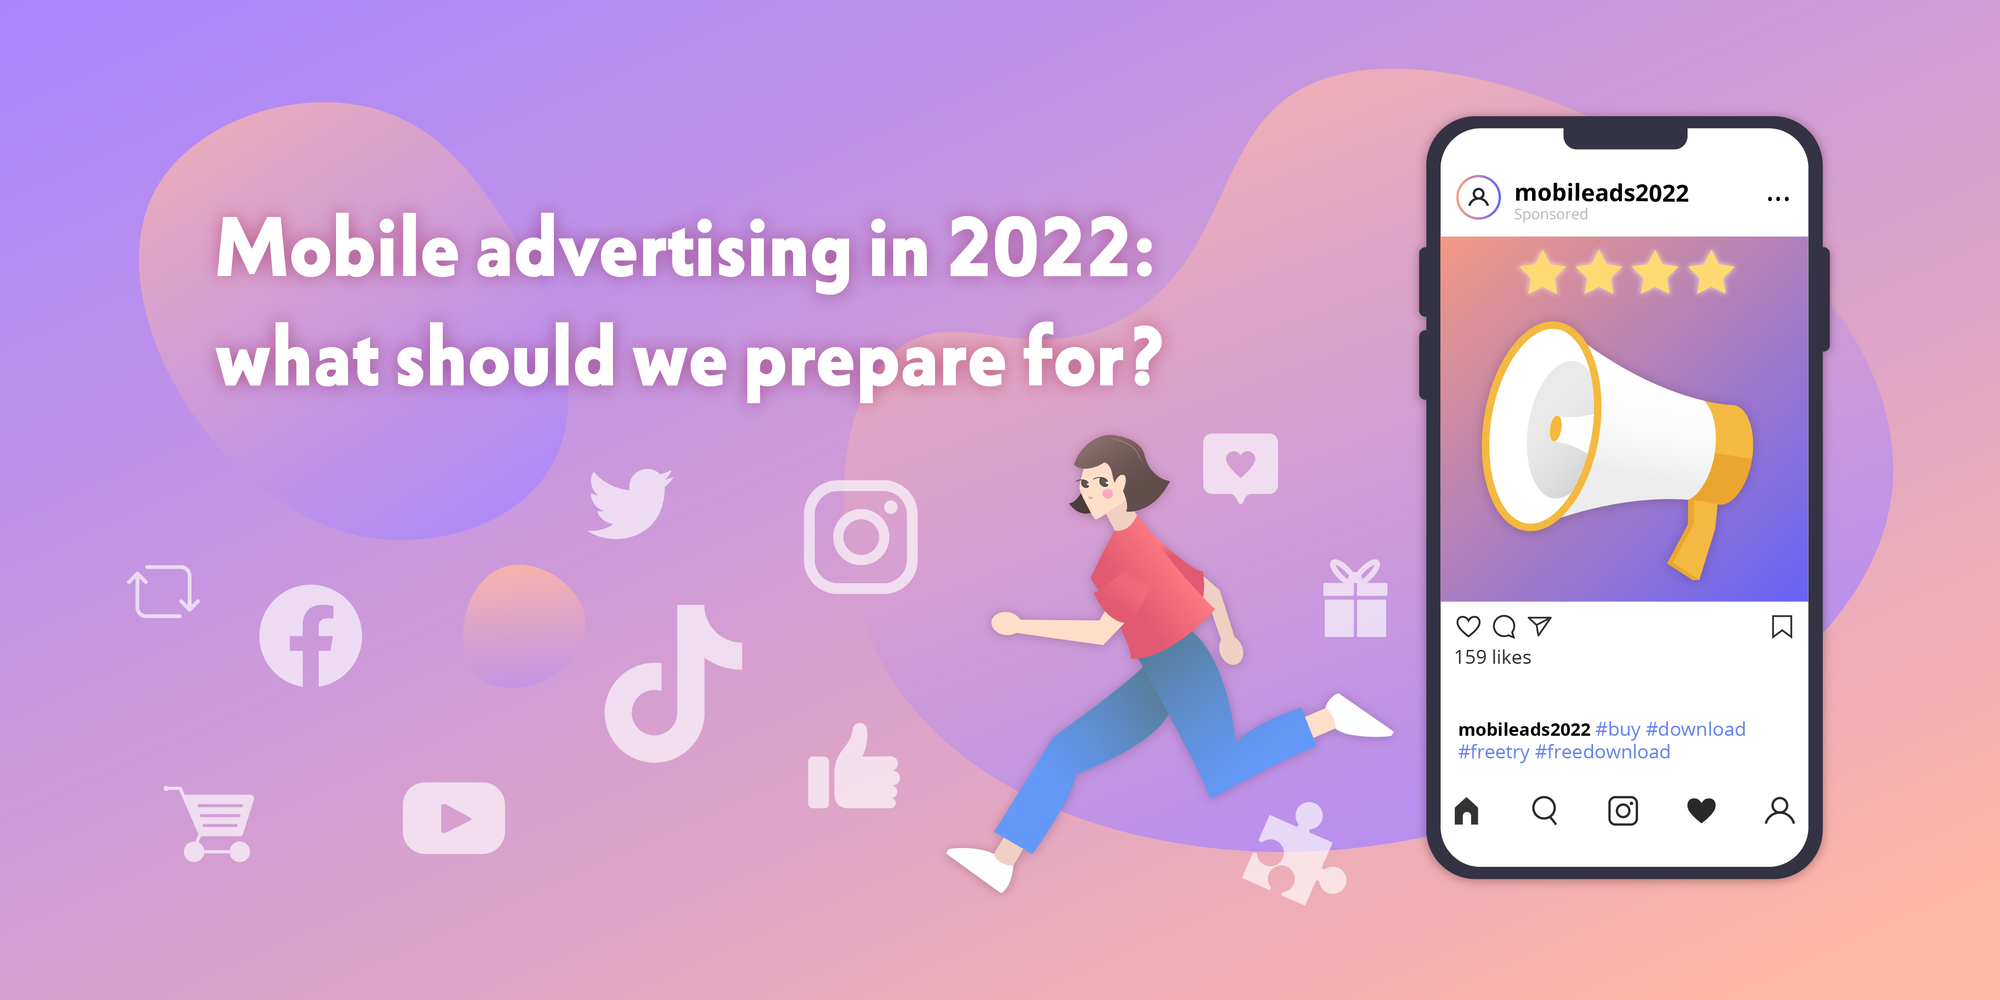 Mobile advertising in 2022: what should we prepare for?